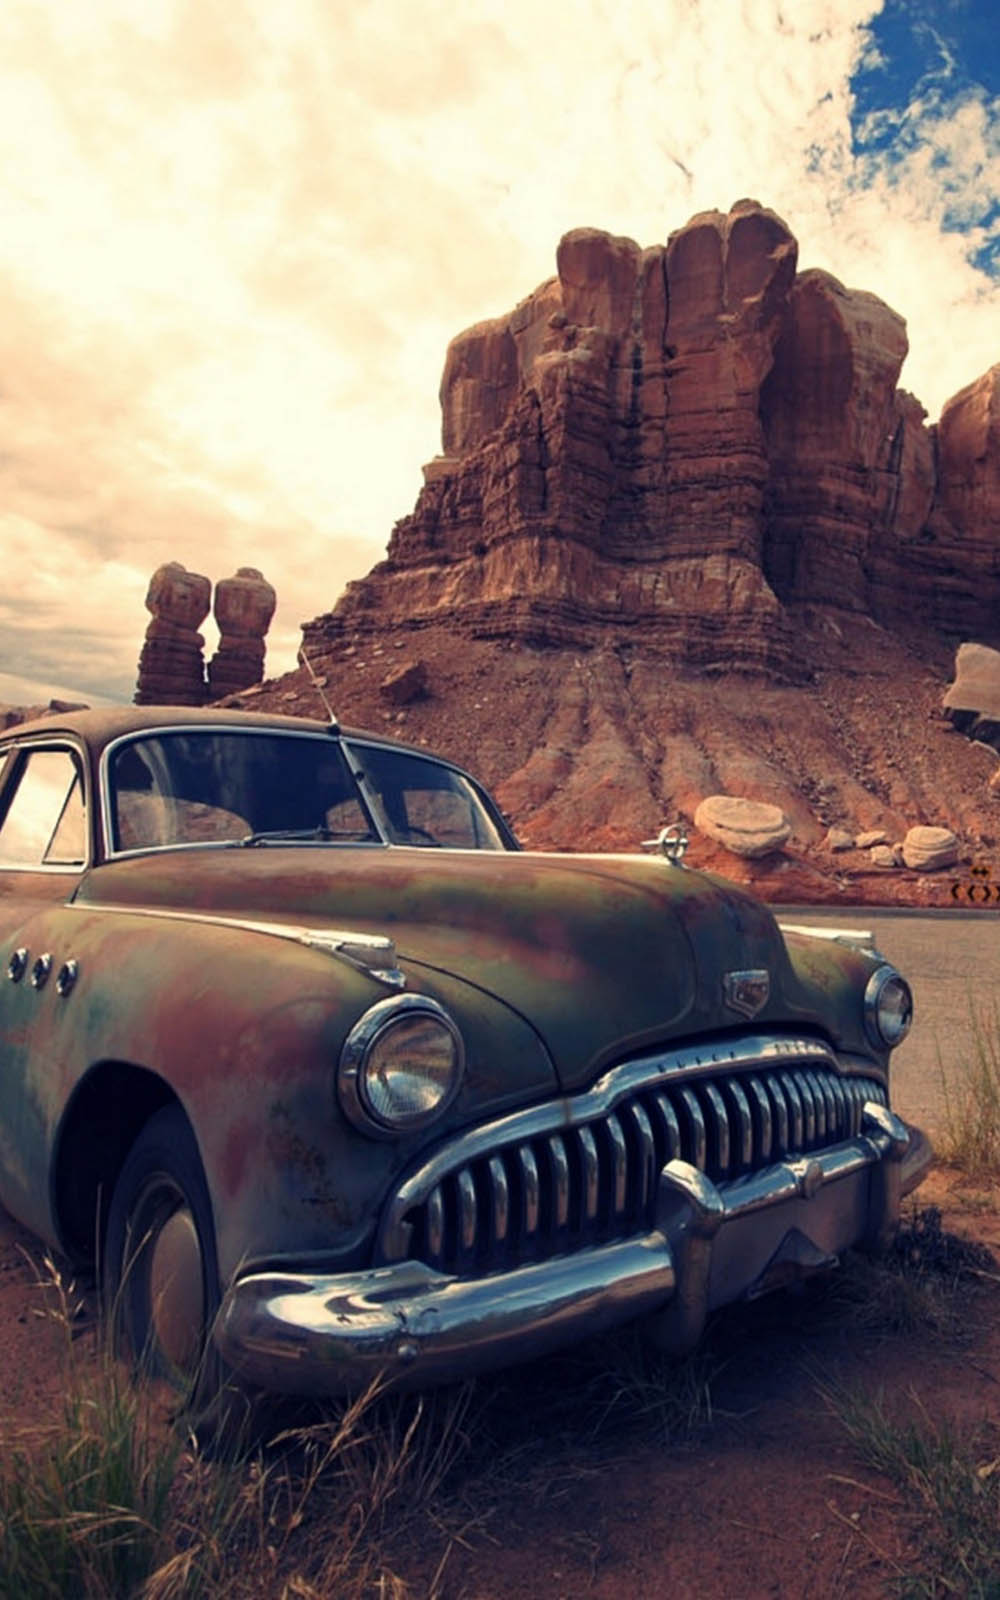 Buick Wallpapers